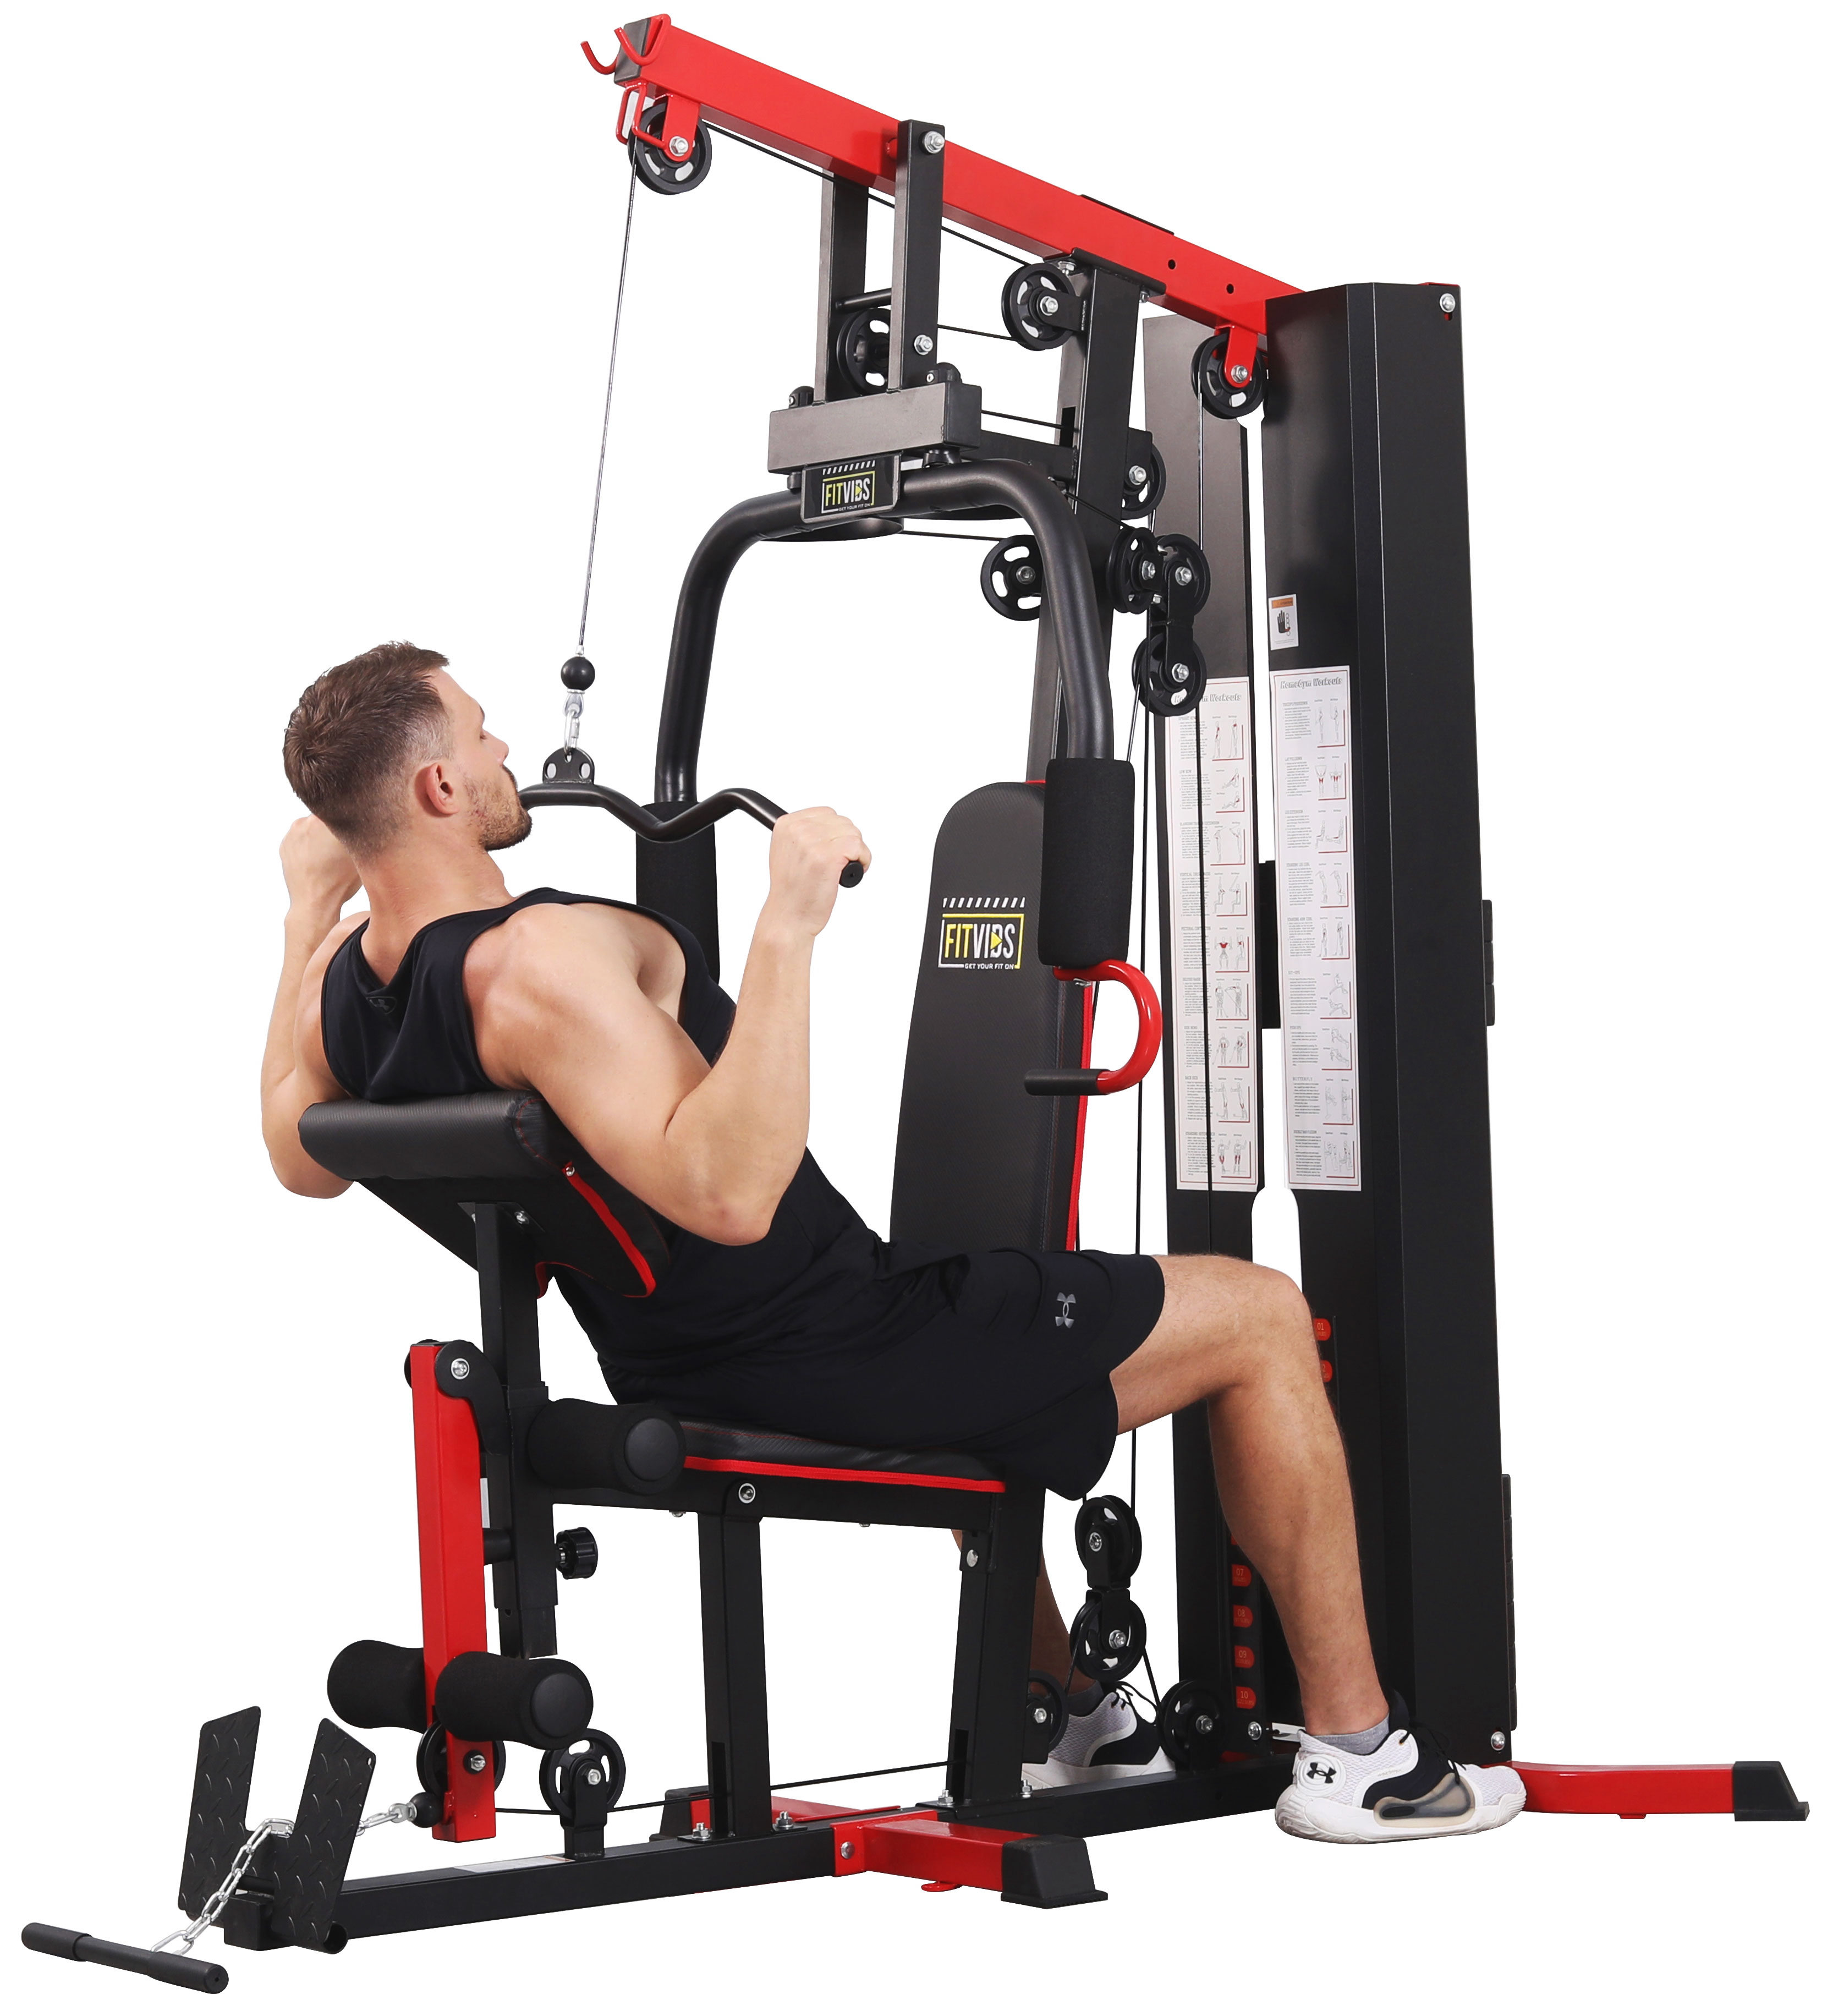 Fitvids LX750 Home Gym System Workout Station with 330 Lbs of Resistance, 122.5 Lbs Weight Stack, One Station, Comes with Installation Instruction Video, Ships in 5 Boxes - image 4 of 13